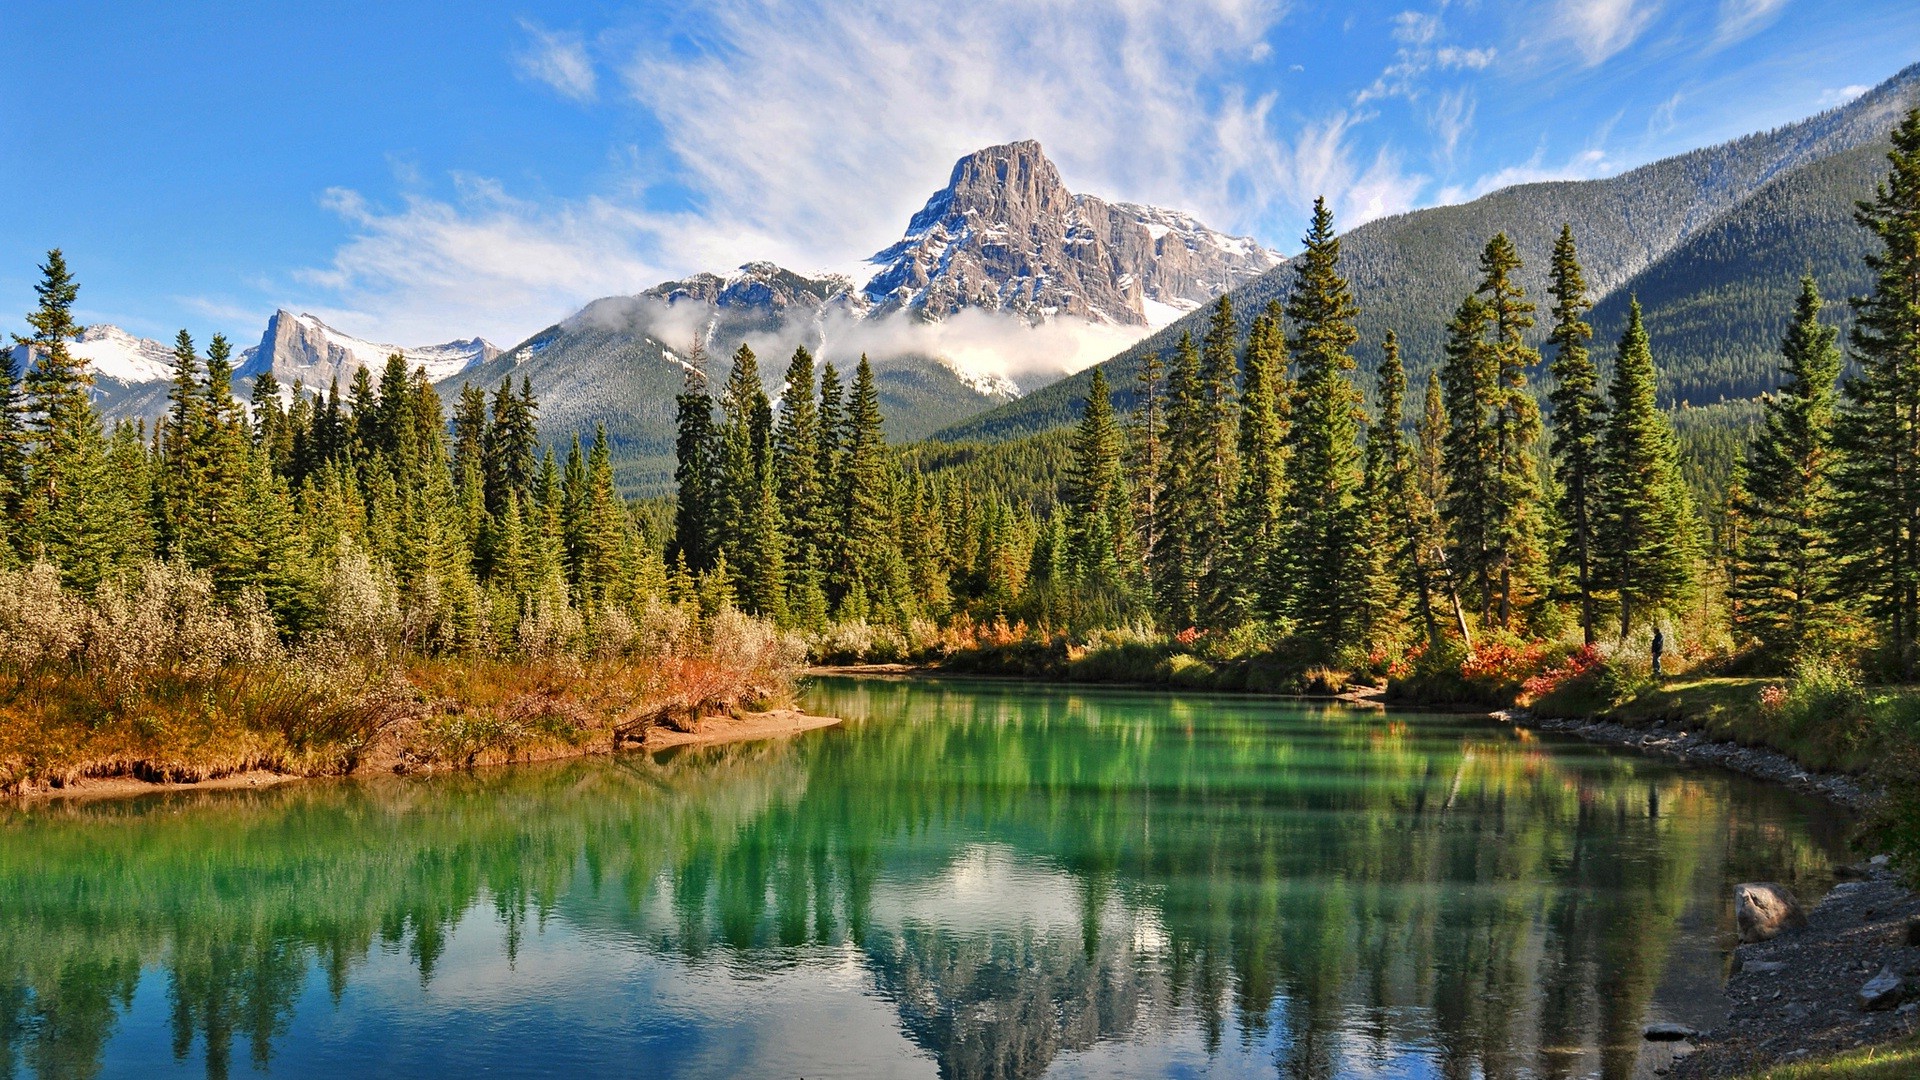 lake, Forest, Mountain, Canada, Summer, Snowy Peak, Green, Grass, Water, Cl...